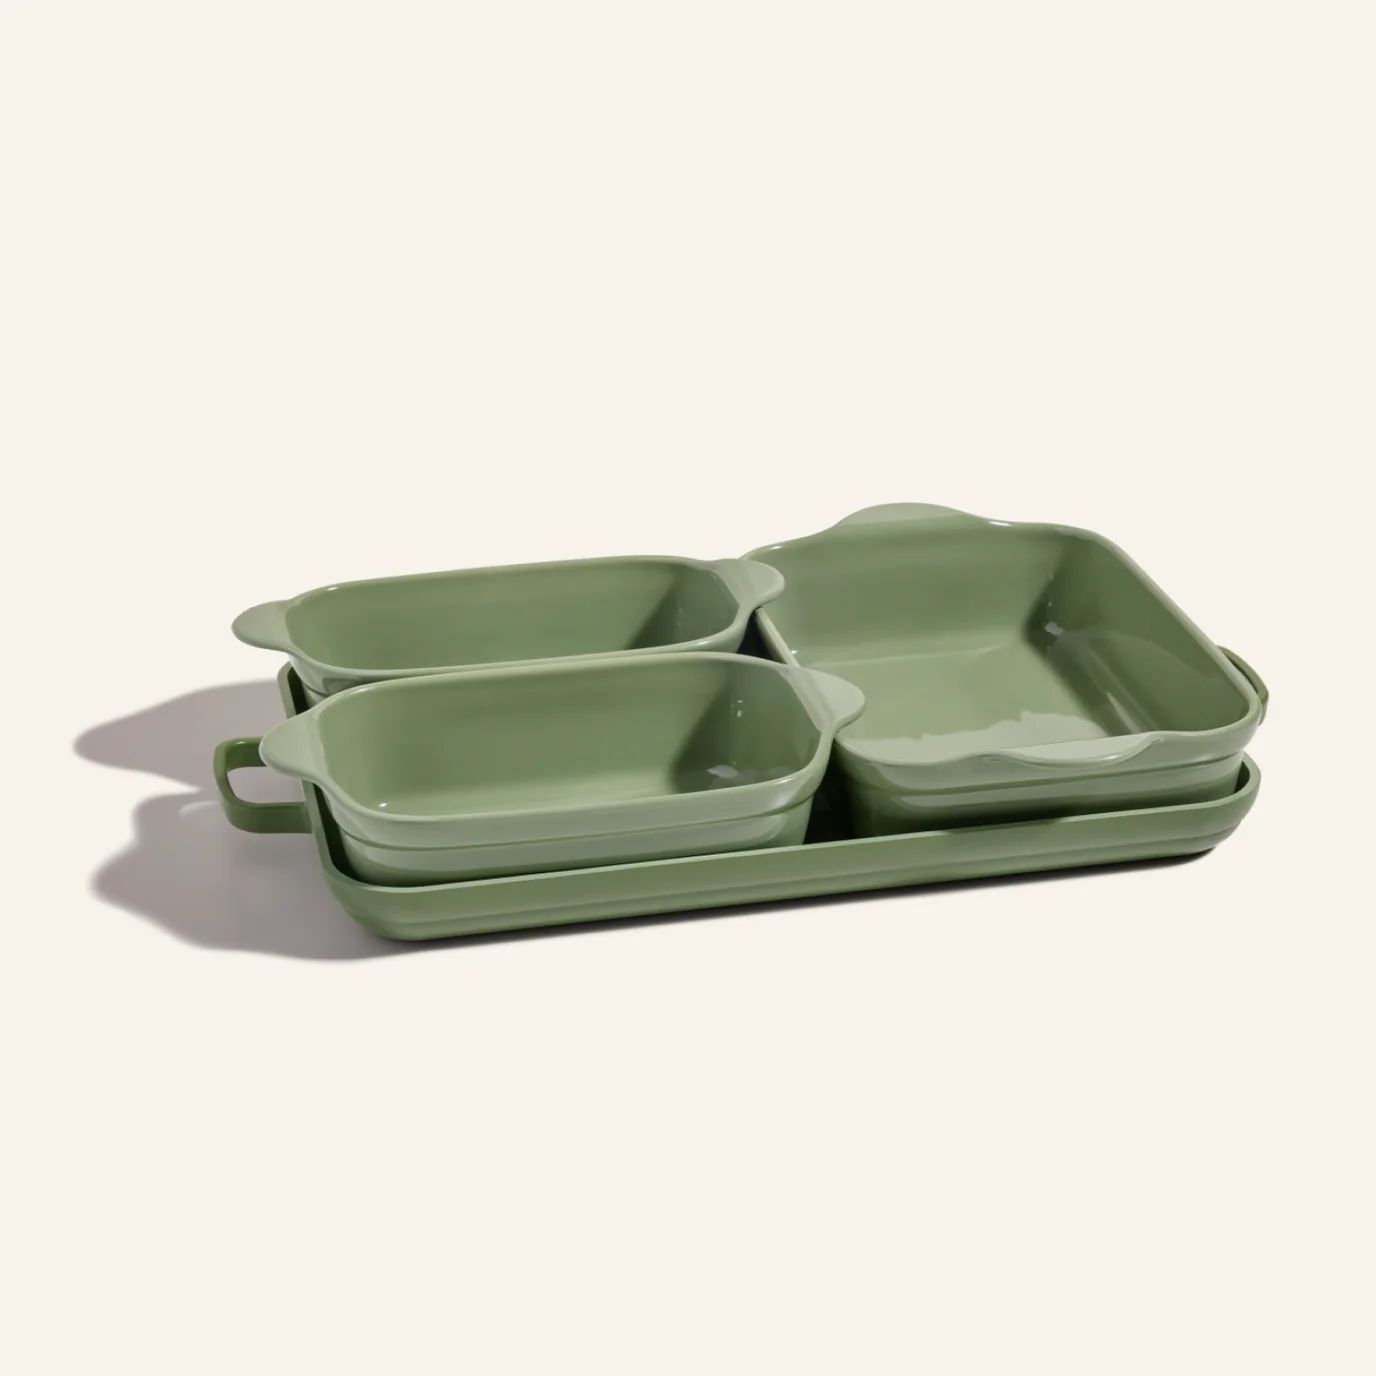 Bakeware Set | Our Place